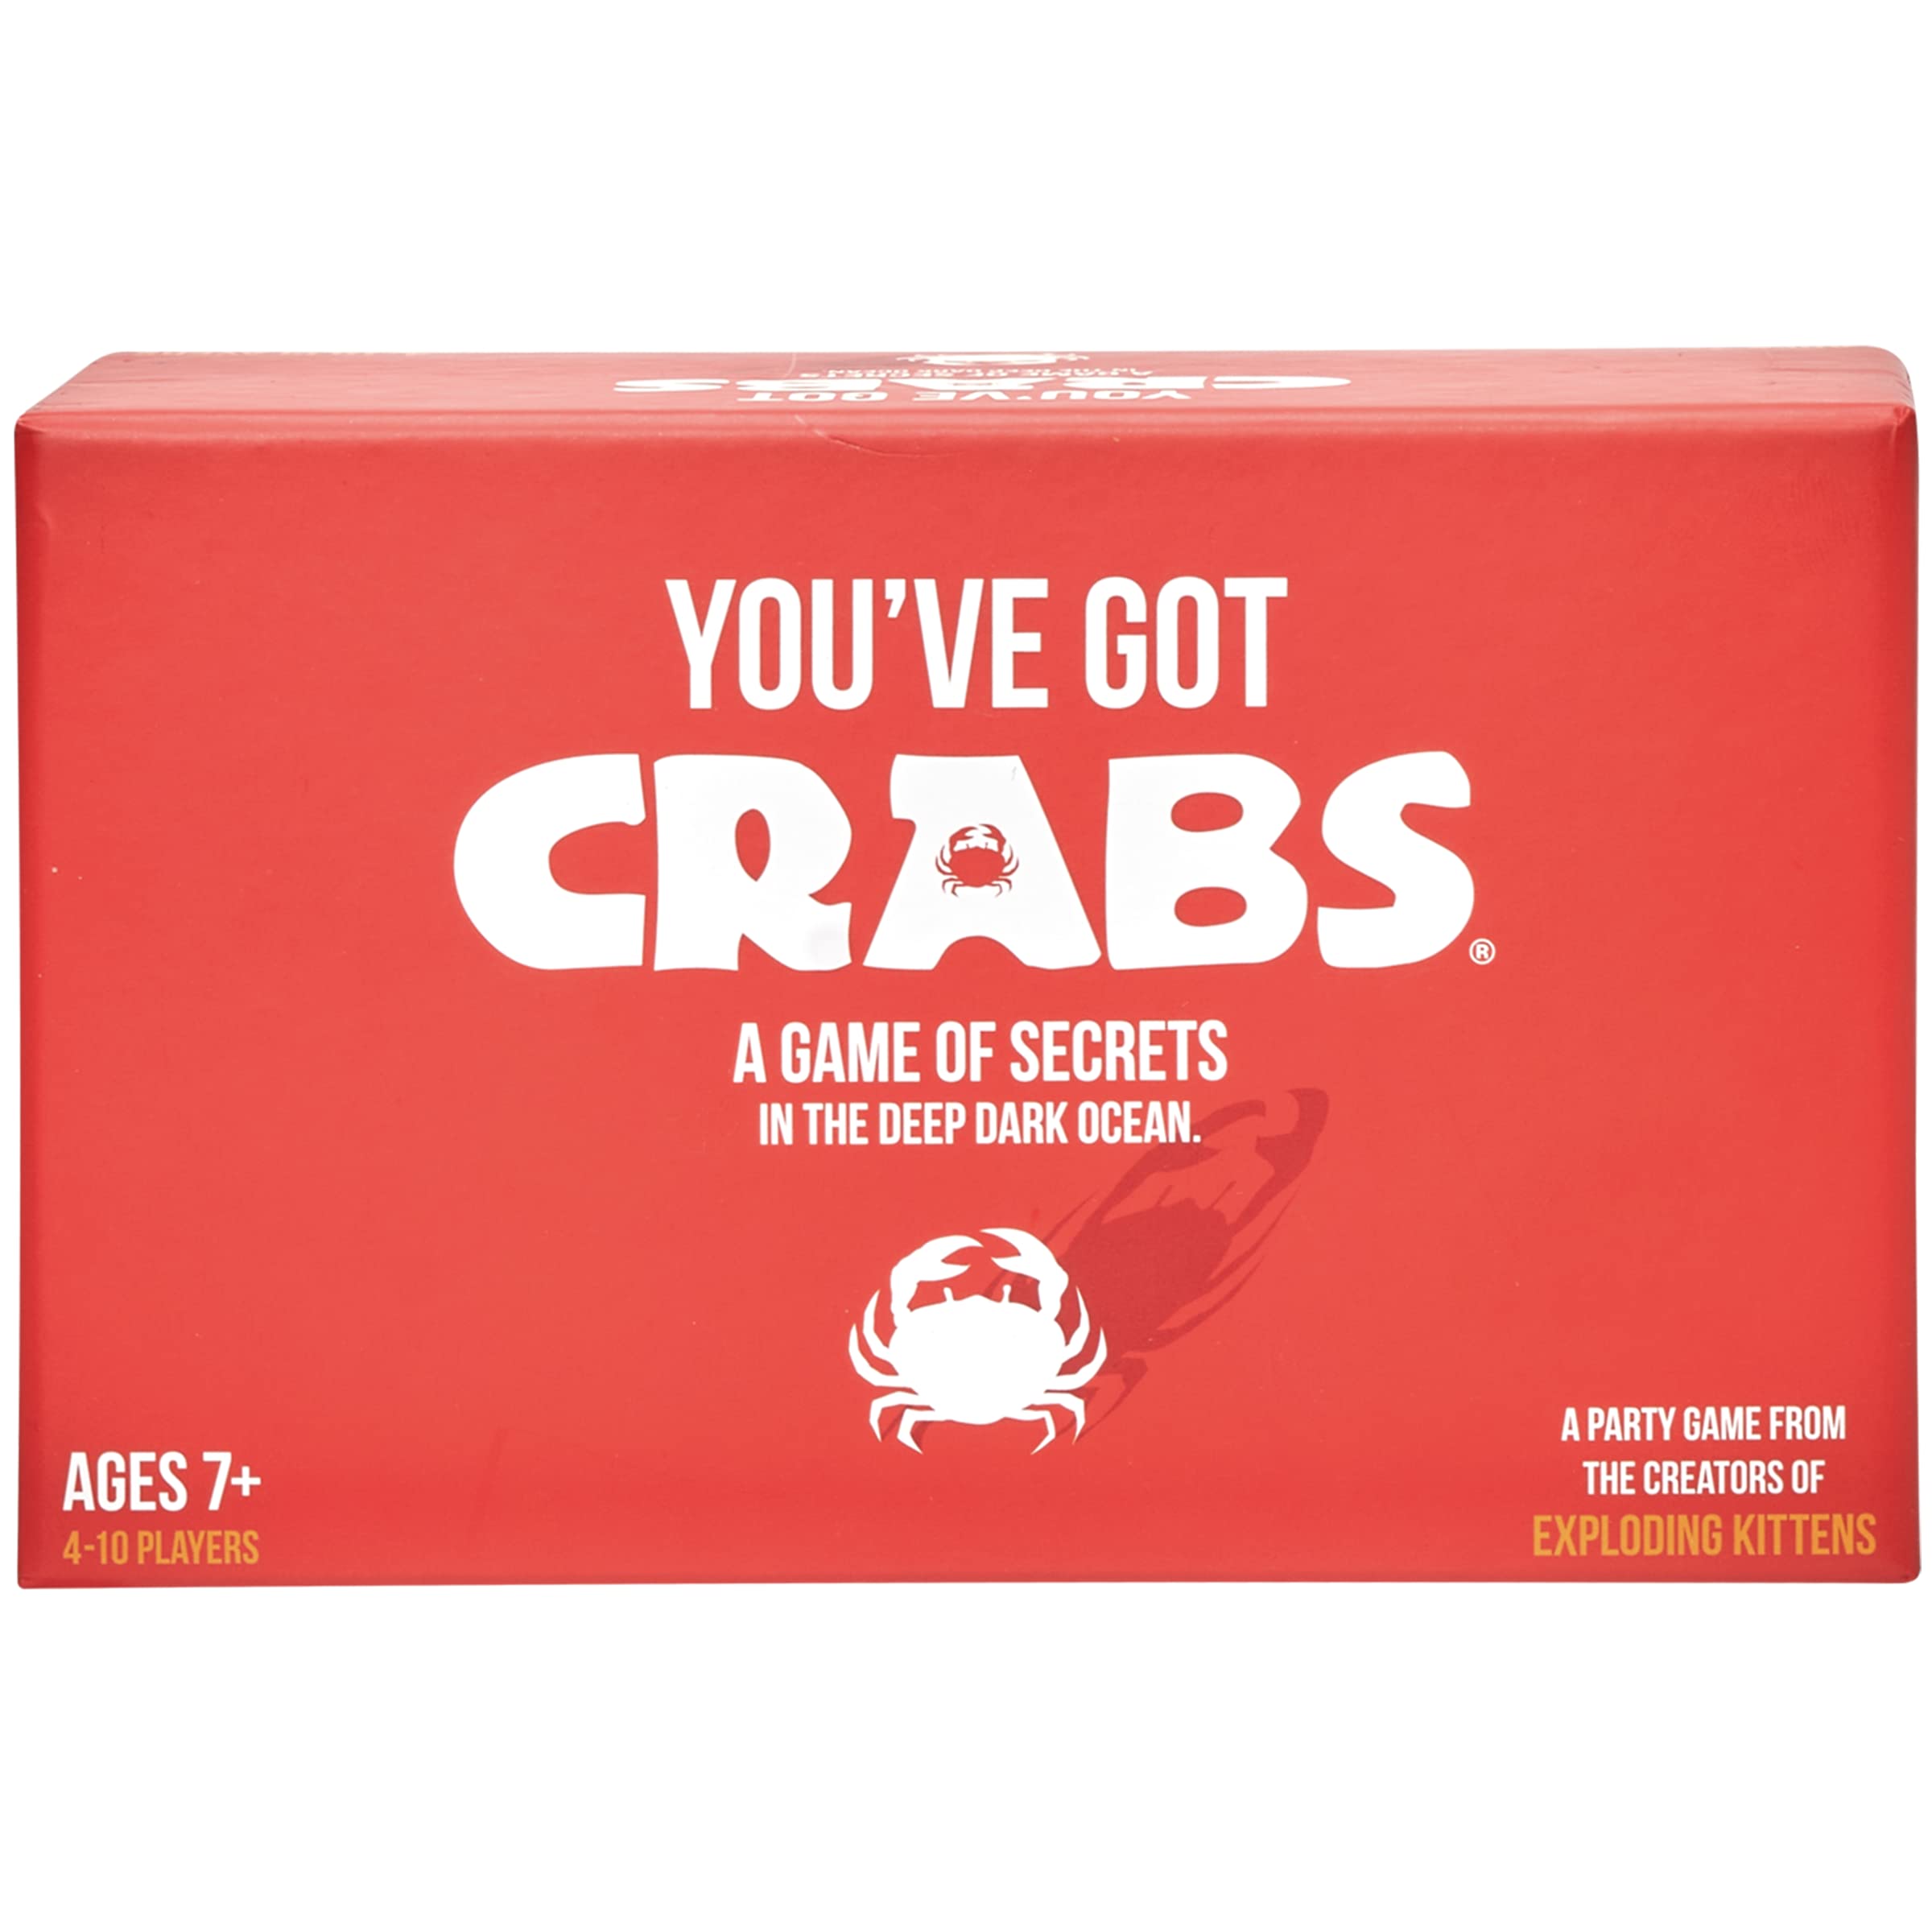 You've Got Crabs by Exploding Kittens - A Card Game Filled with Crustaceans and Secrets - Family-Friendly Party Games - Card Games For Adults, Teens & Kids